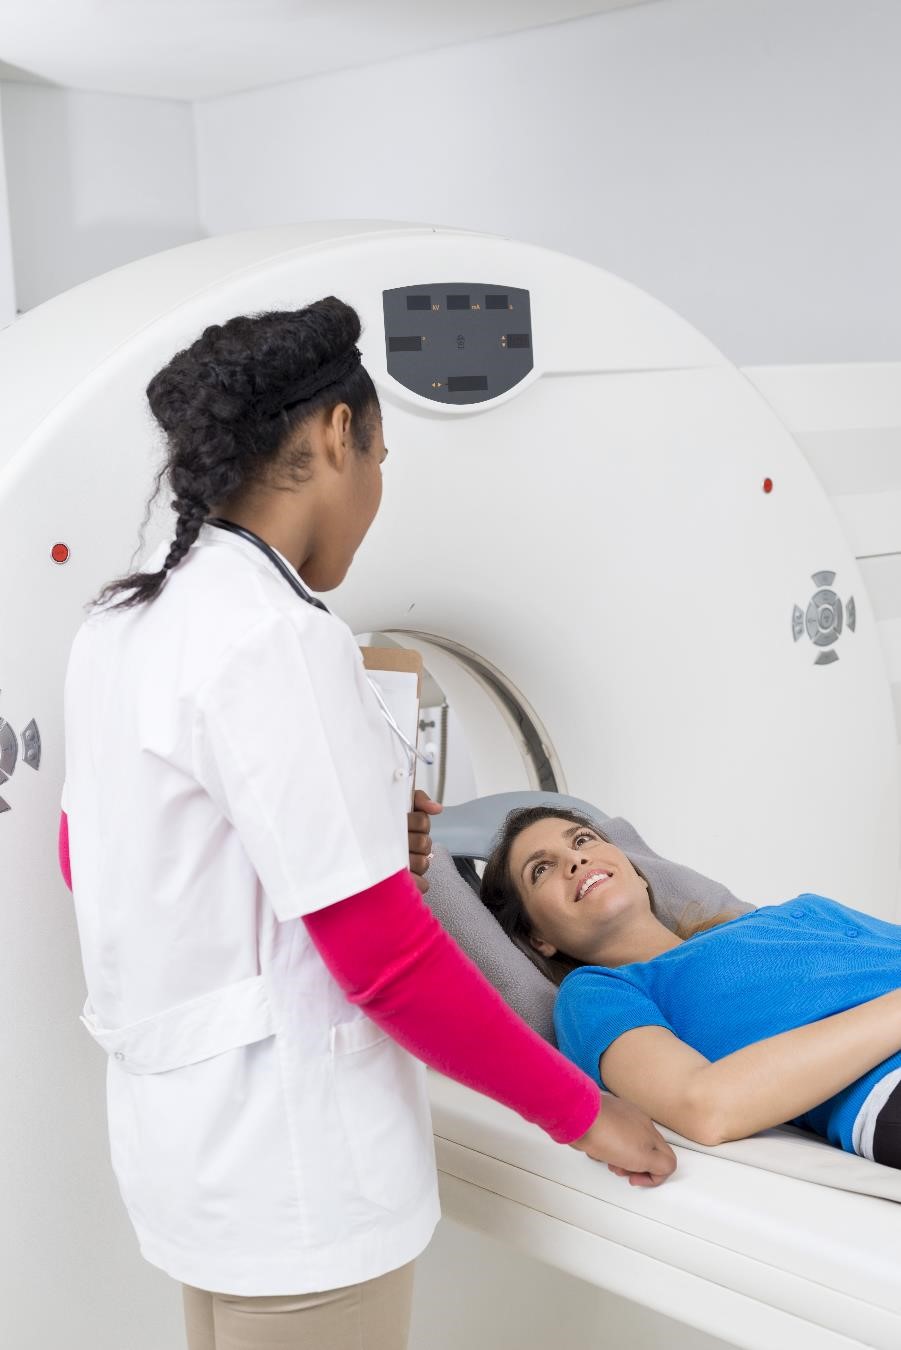 A female health care professional prepares a female patient for an MRI exam.